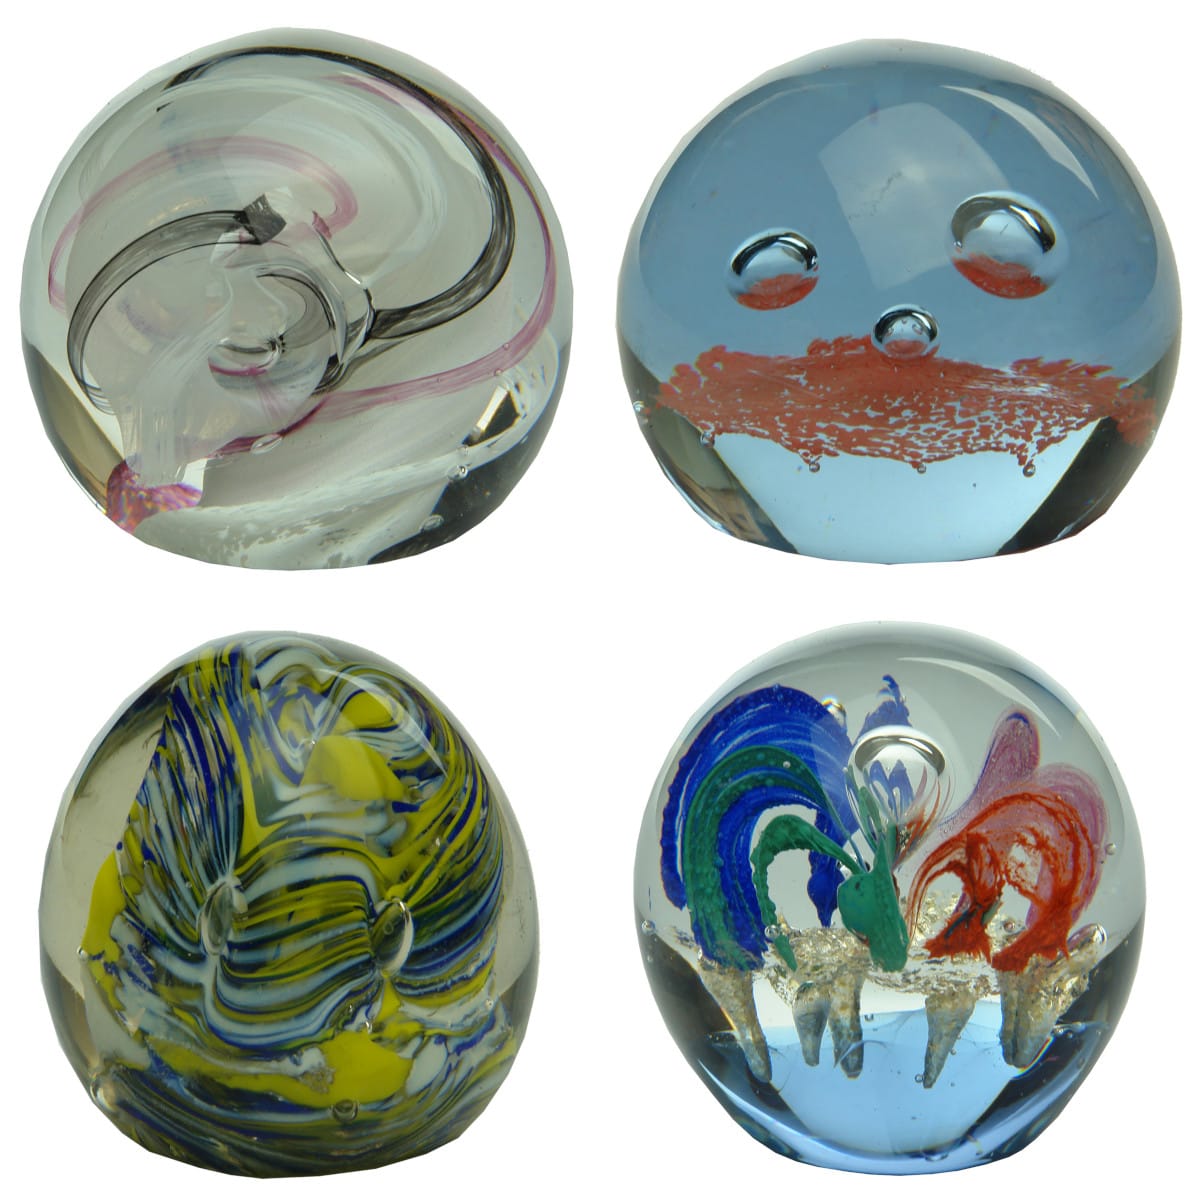 4 Glass Paperweights. White, Black & Pink swirled, Caithness Ribbons Scotland; Pink, CIIC; Egg, Yellow, Blue & White; Round, Green, Red, Pink & Blue.